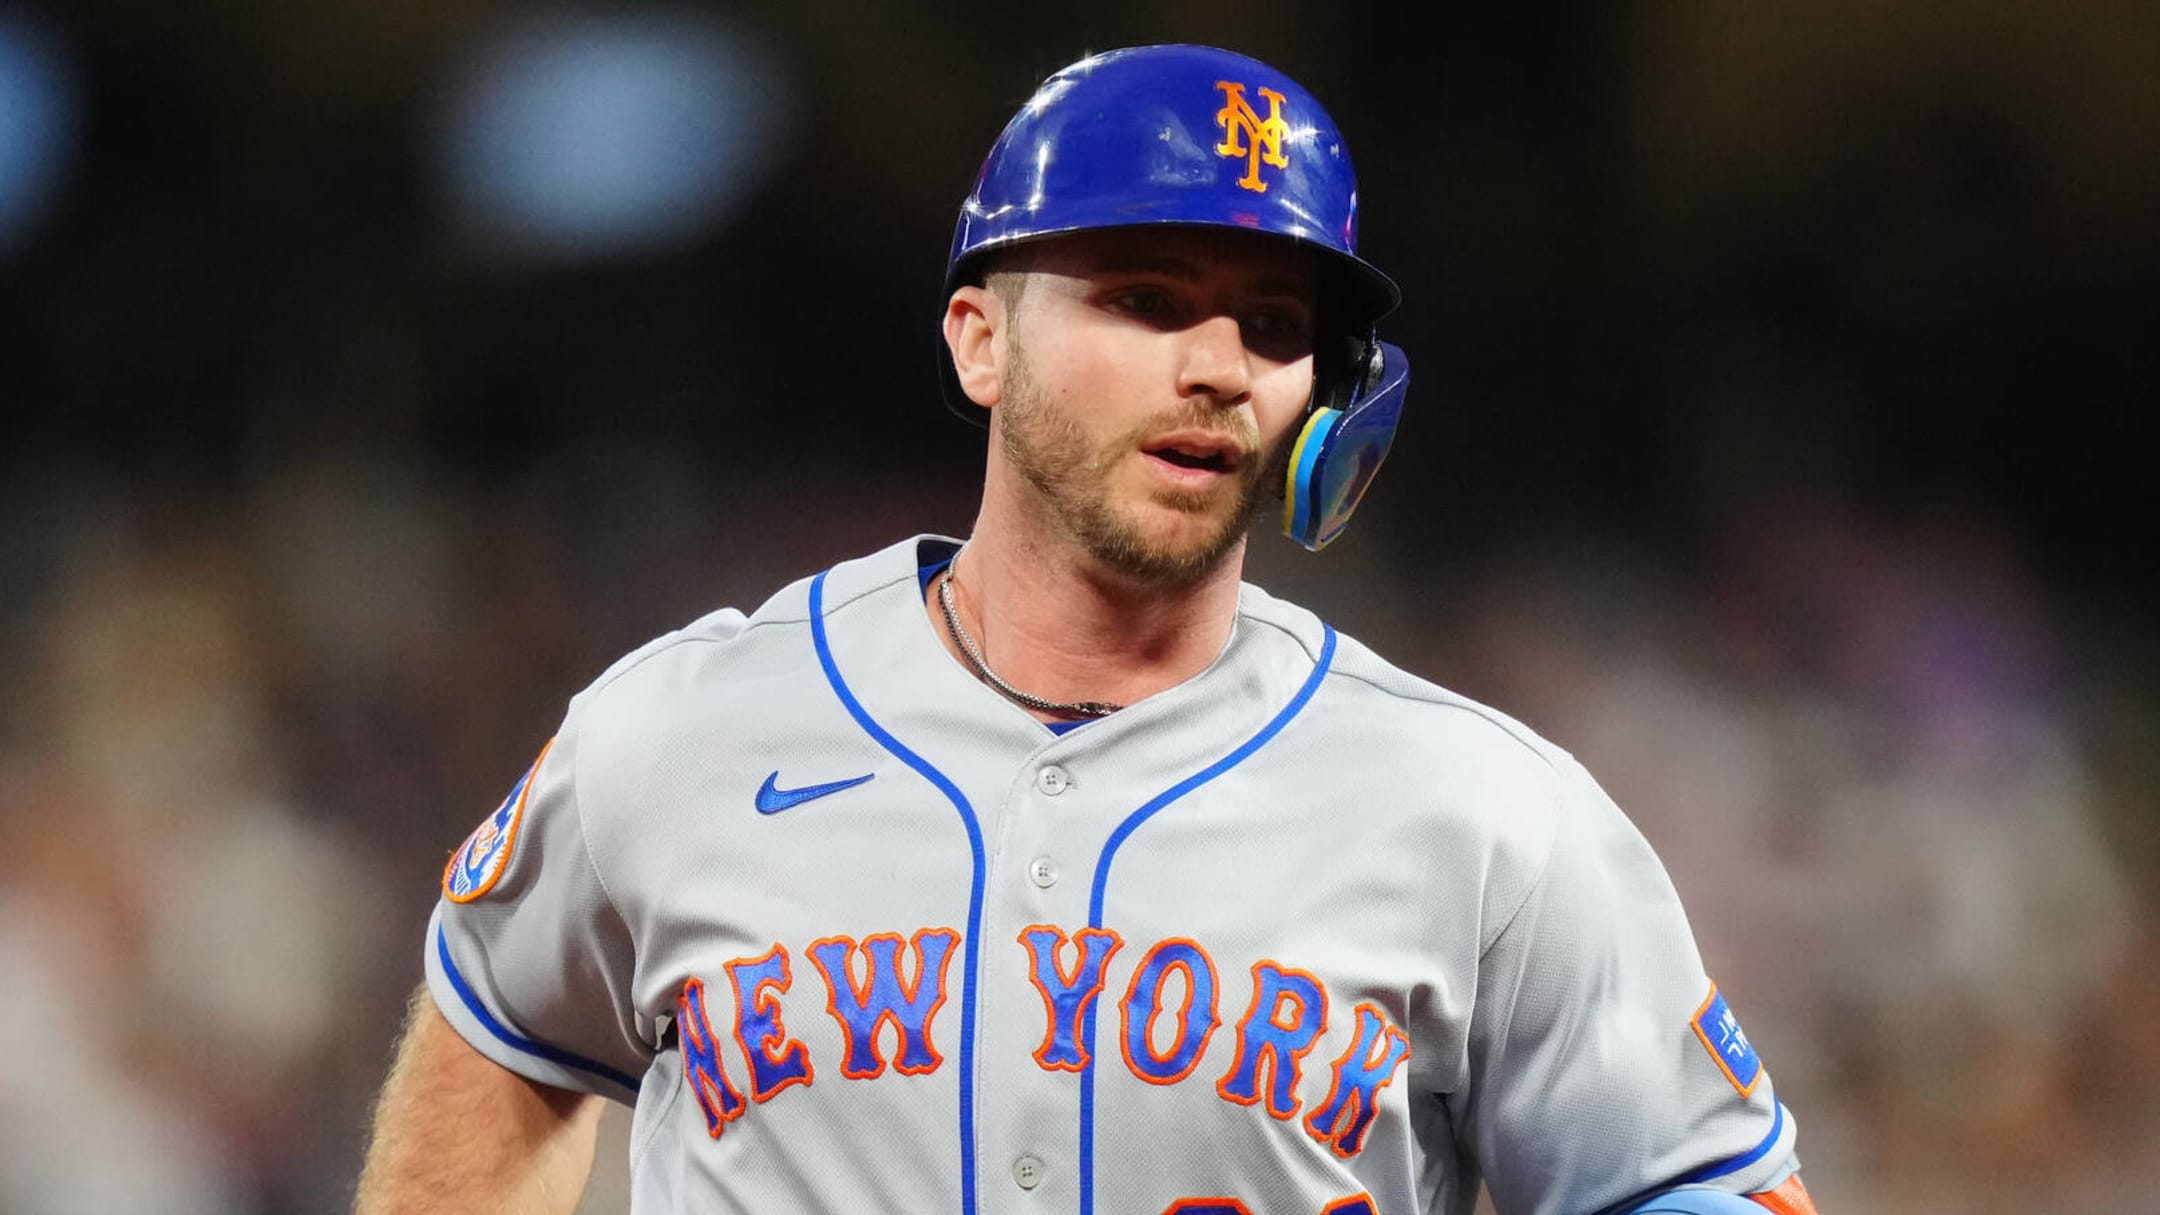 Pete Alonso Needs More Than Power to Claim His Spot With the Mets